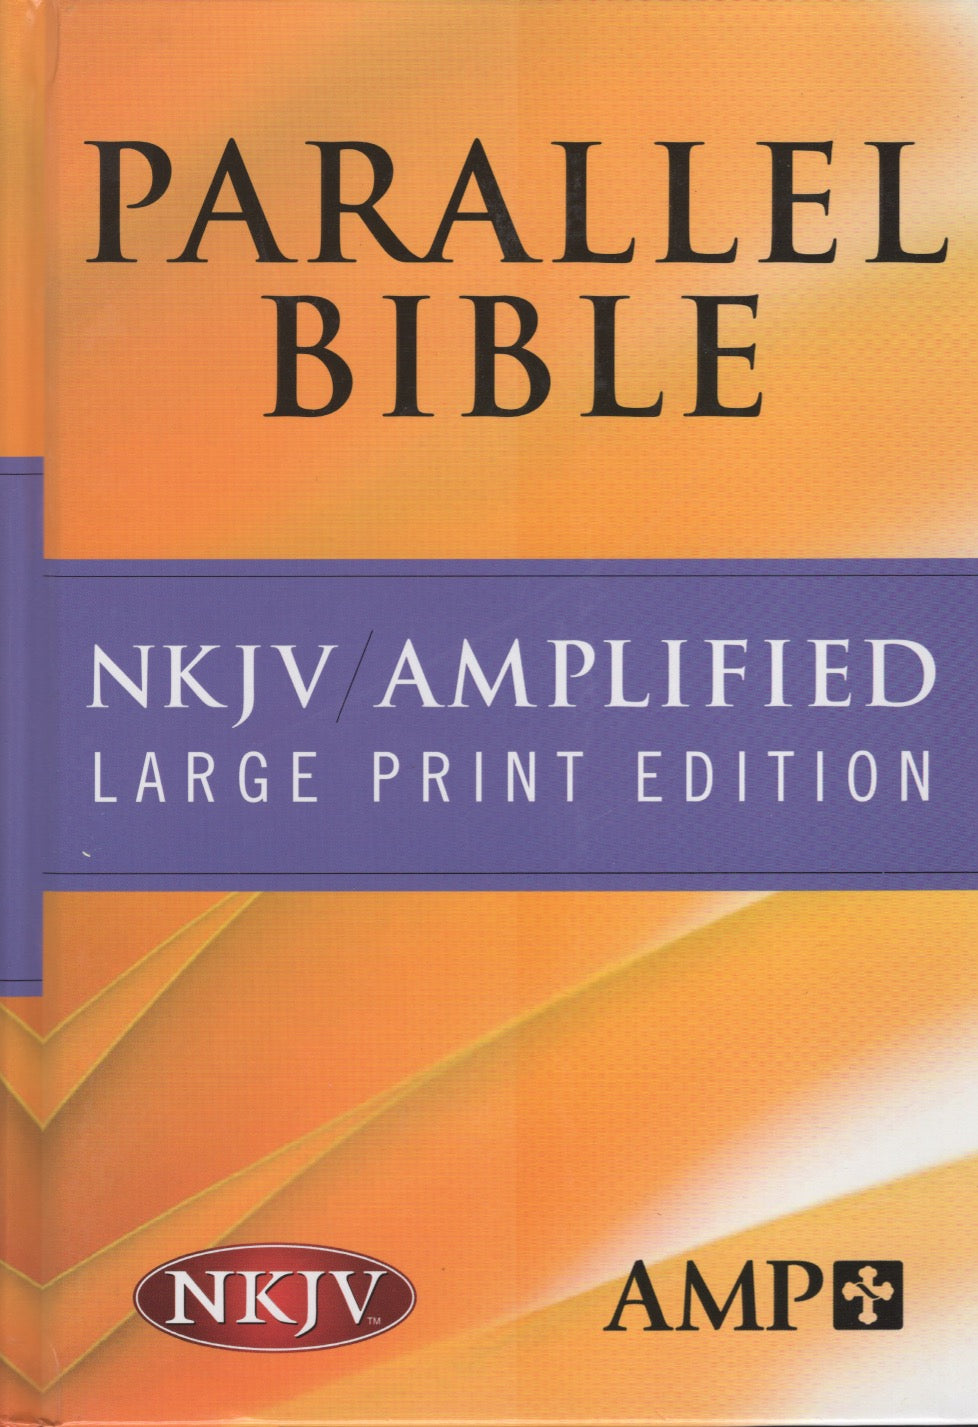 The NKJV-Amplified Parallel Bible (Large Print Edition) by Hendrickson Bibles